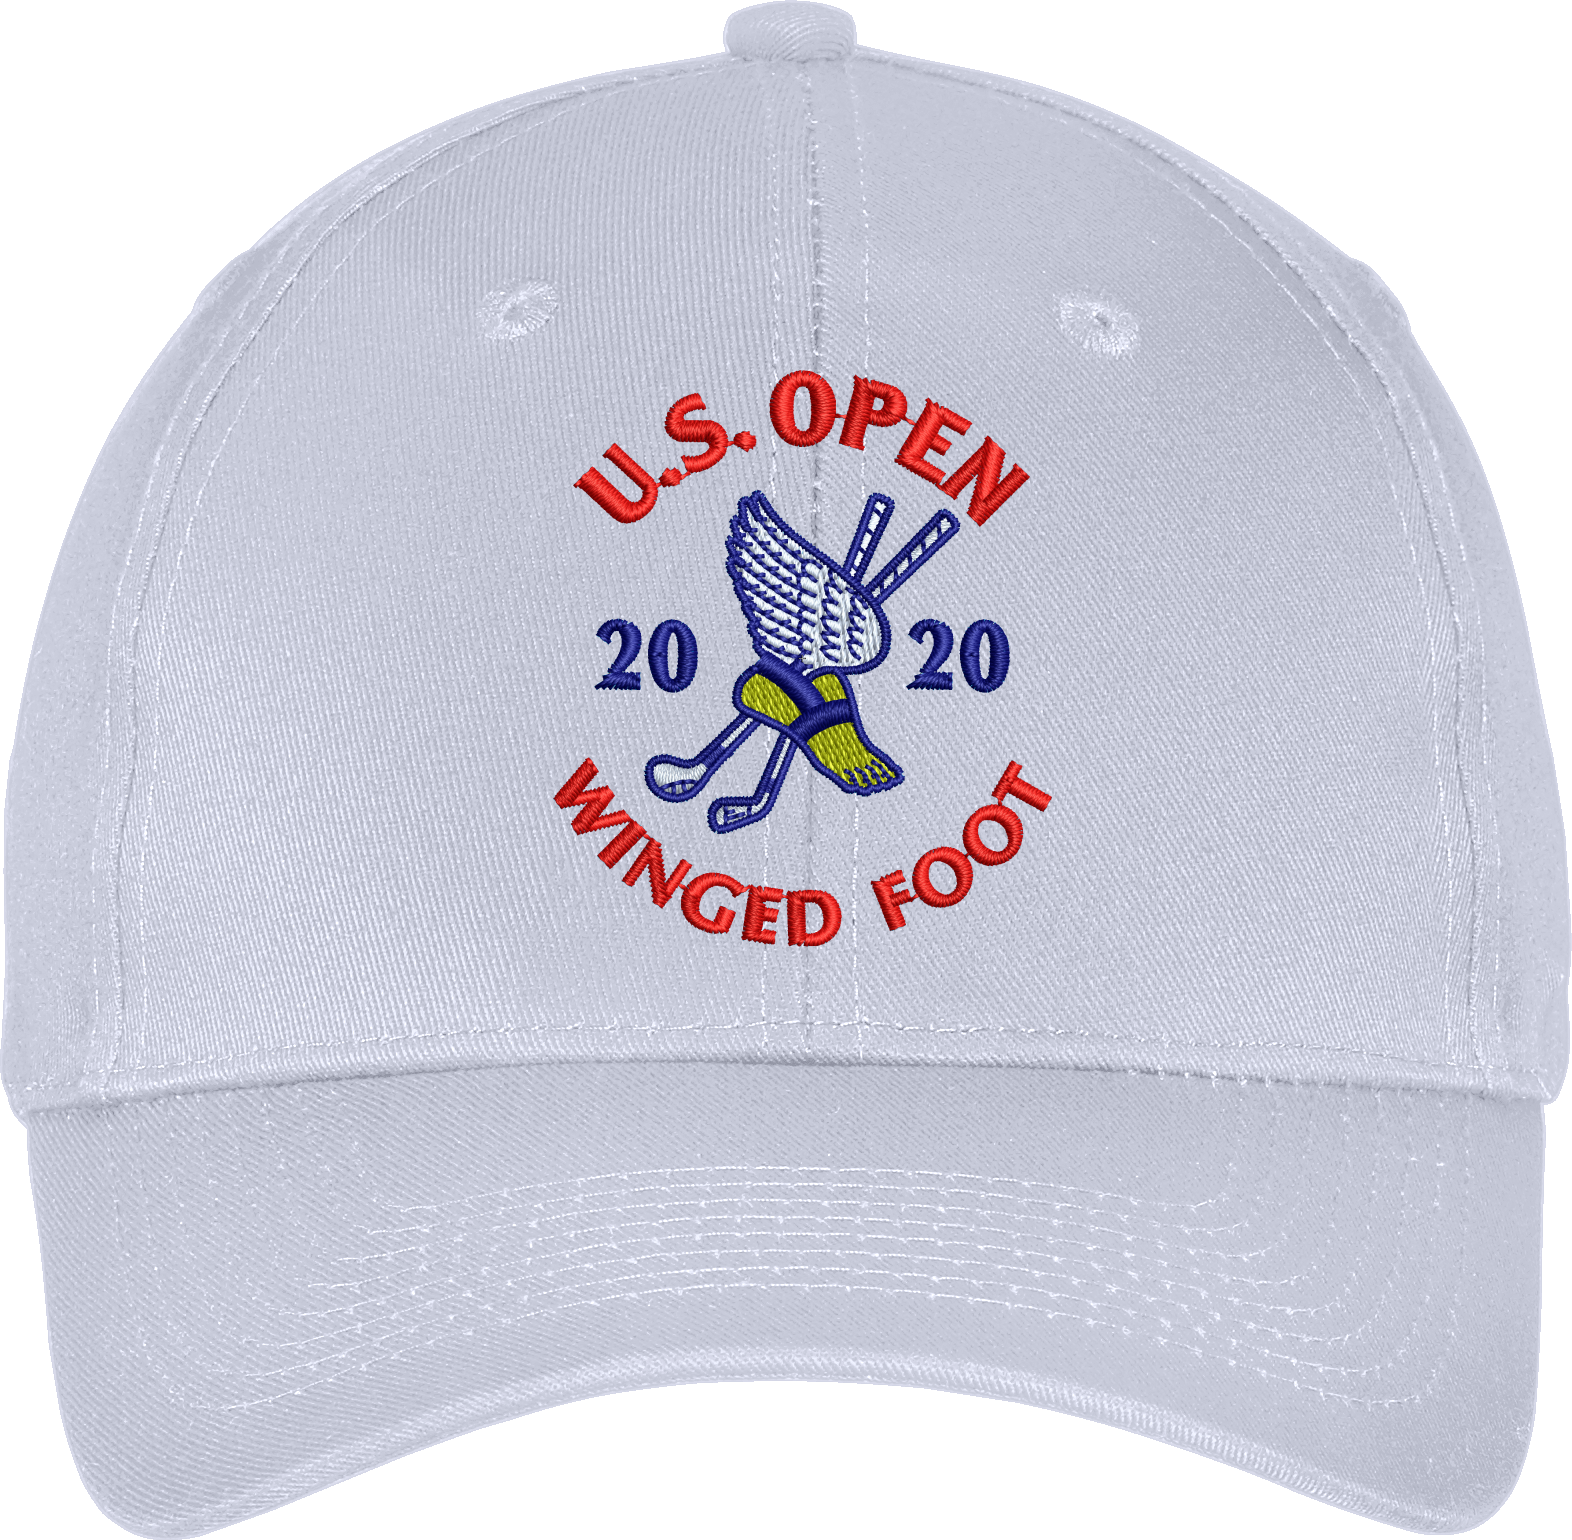 2020 Us Open Winged Foot Golf Club Tournament Embroidered Golf Hat Cap